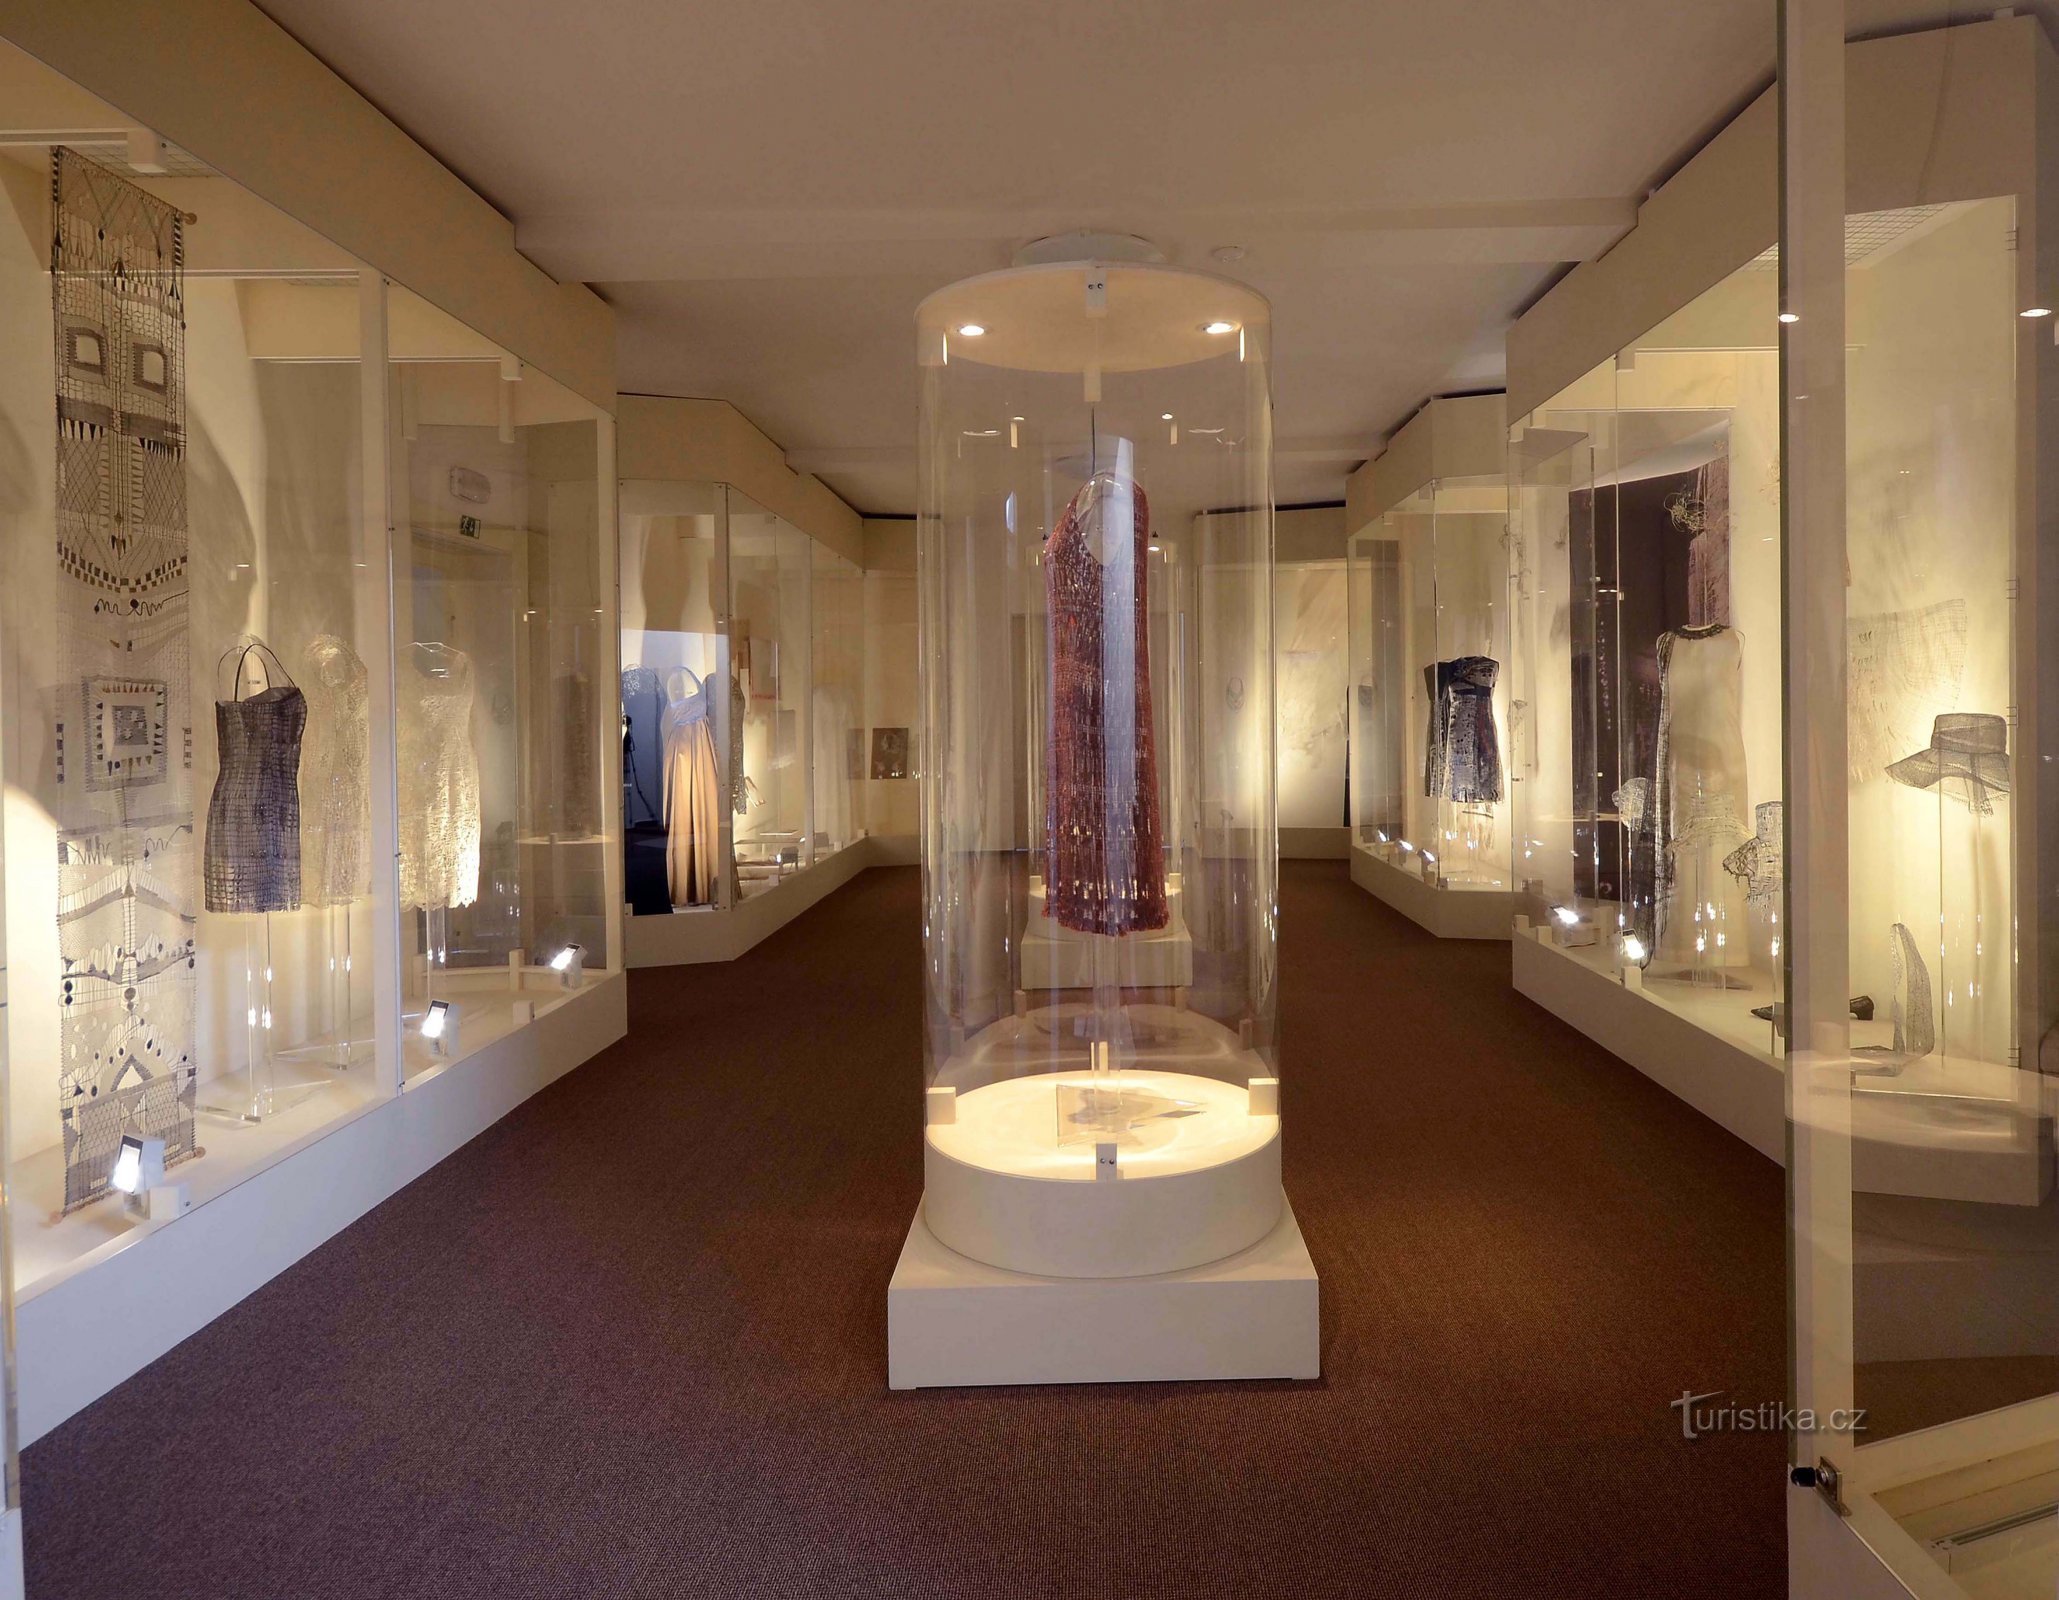 Exhibition of the Vamberk Lace Museum